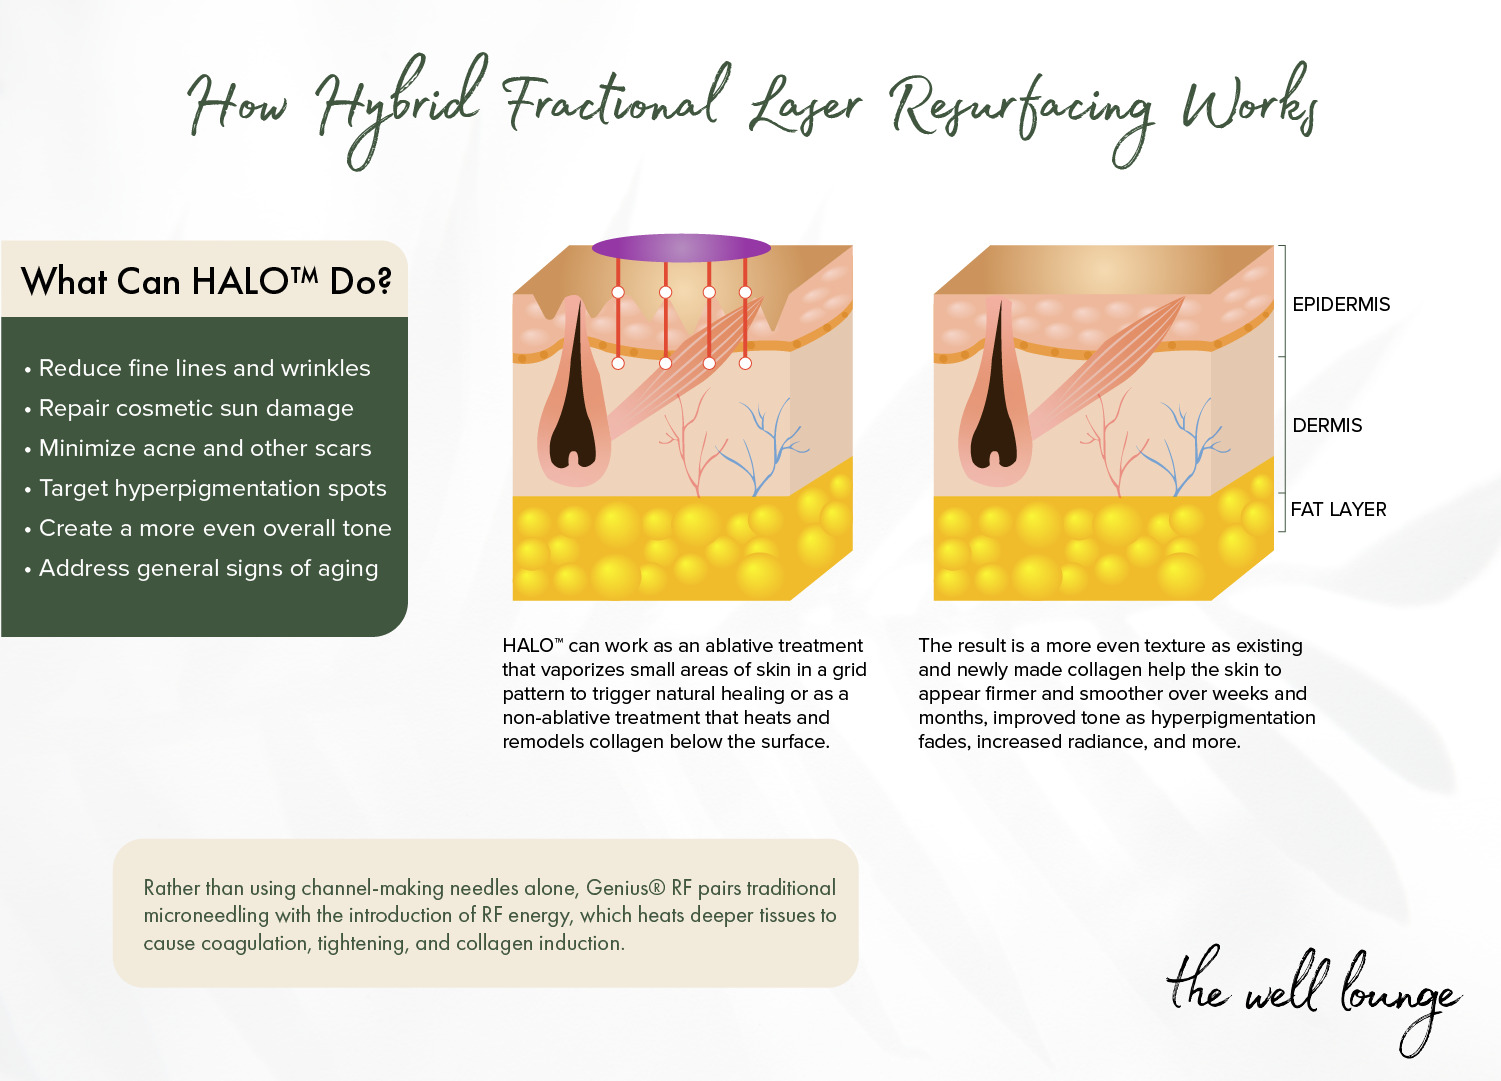 See the benefits of HALO™ hybrid fractional laser resurfacing at Newtown, PA's The Well Lounge.